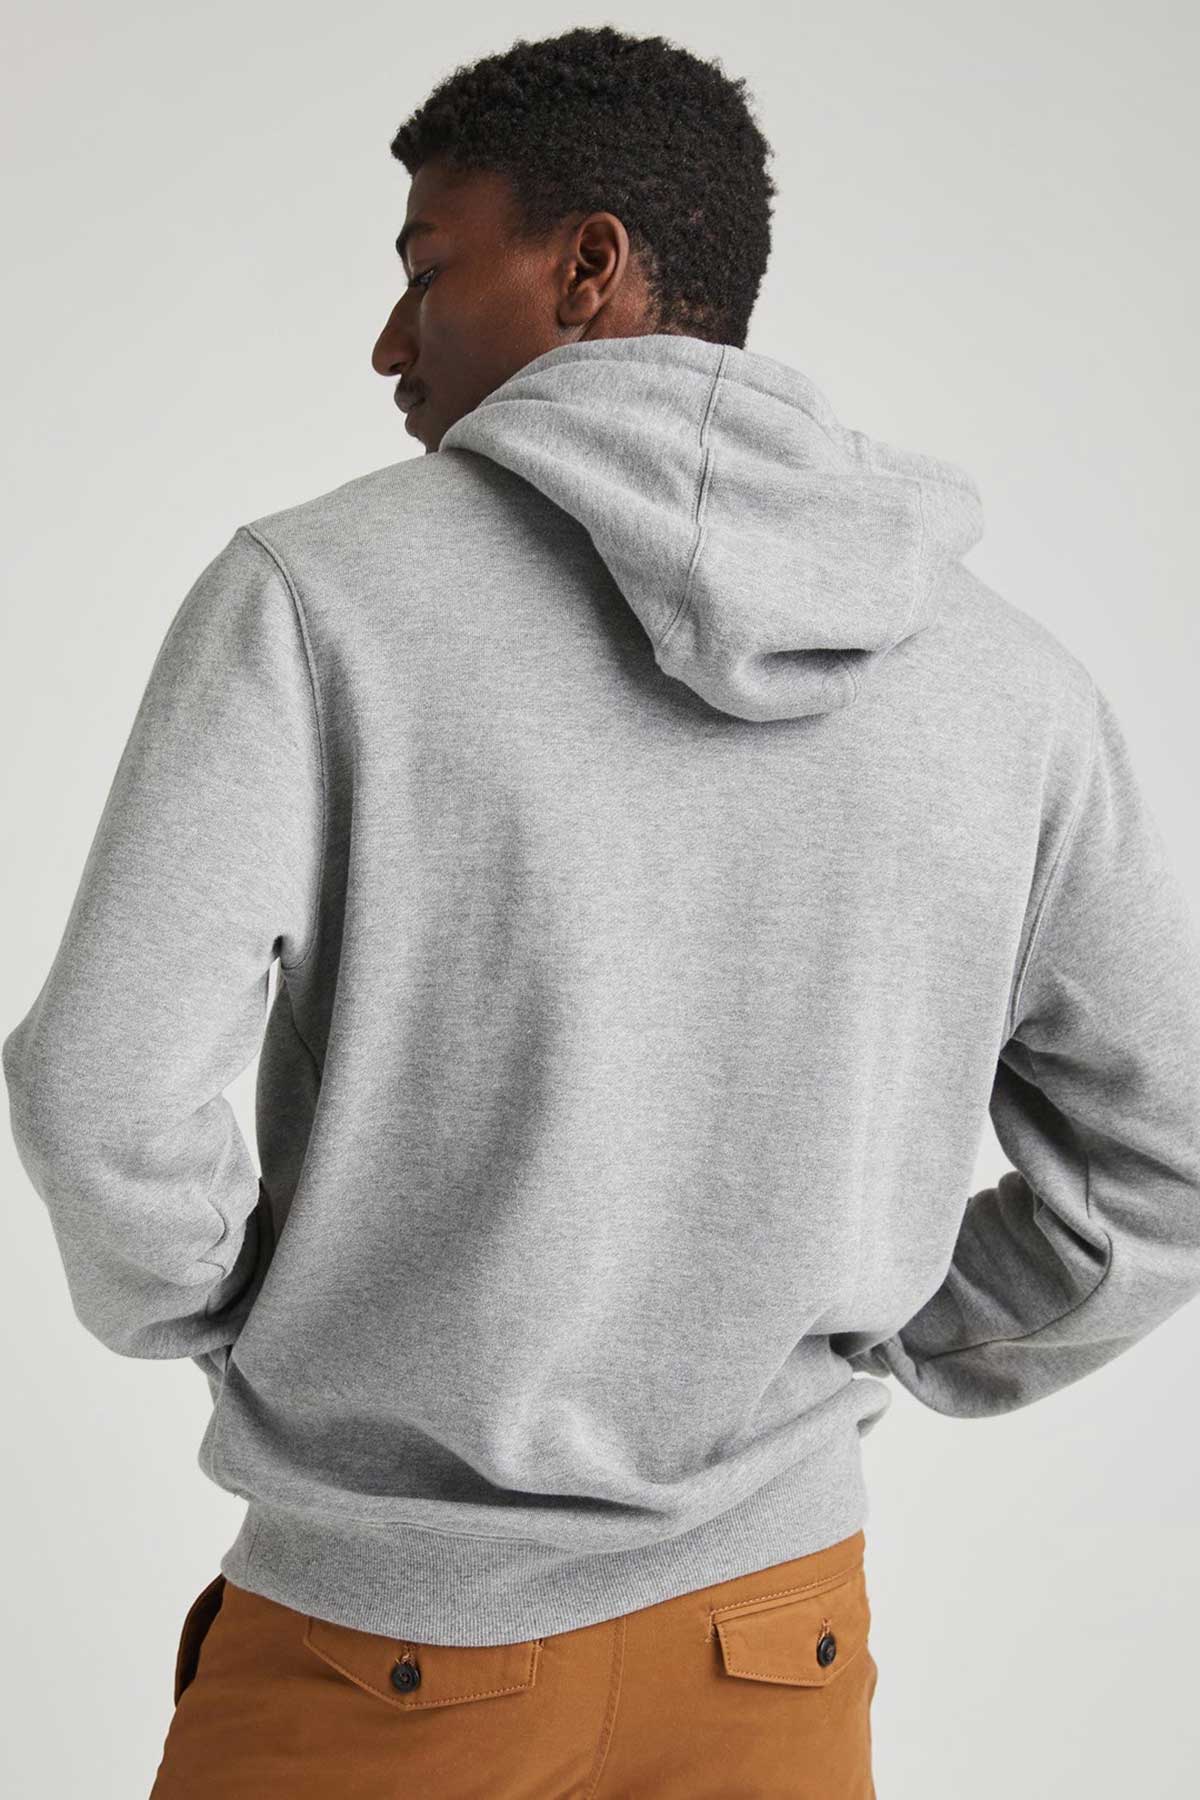 Richer Poorer - Recycled Pullover Hoodie - Heather Grey - Back